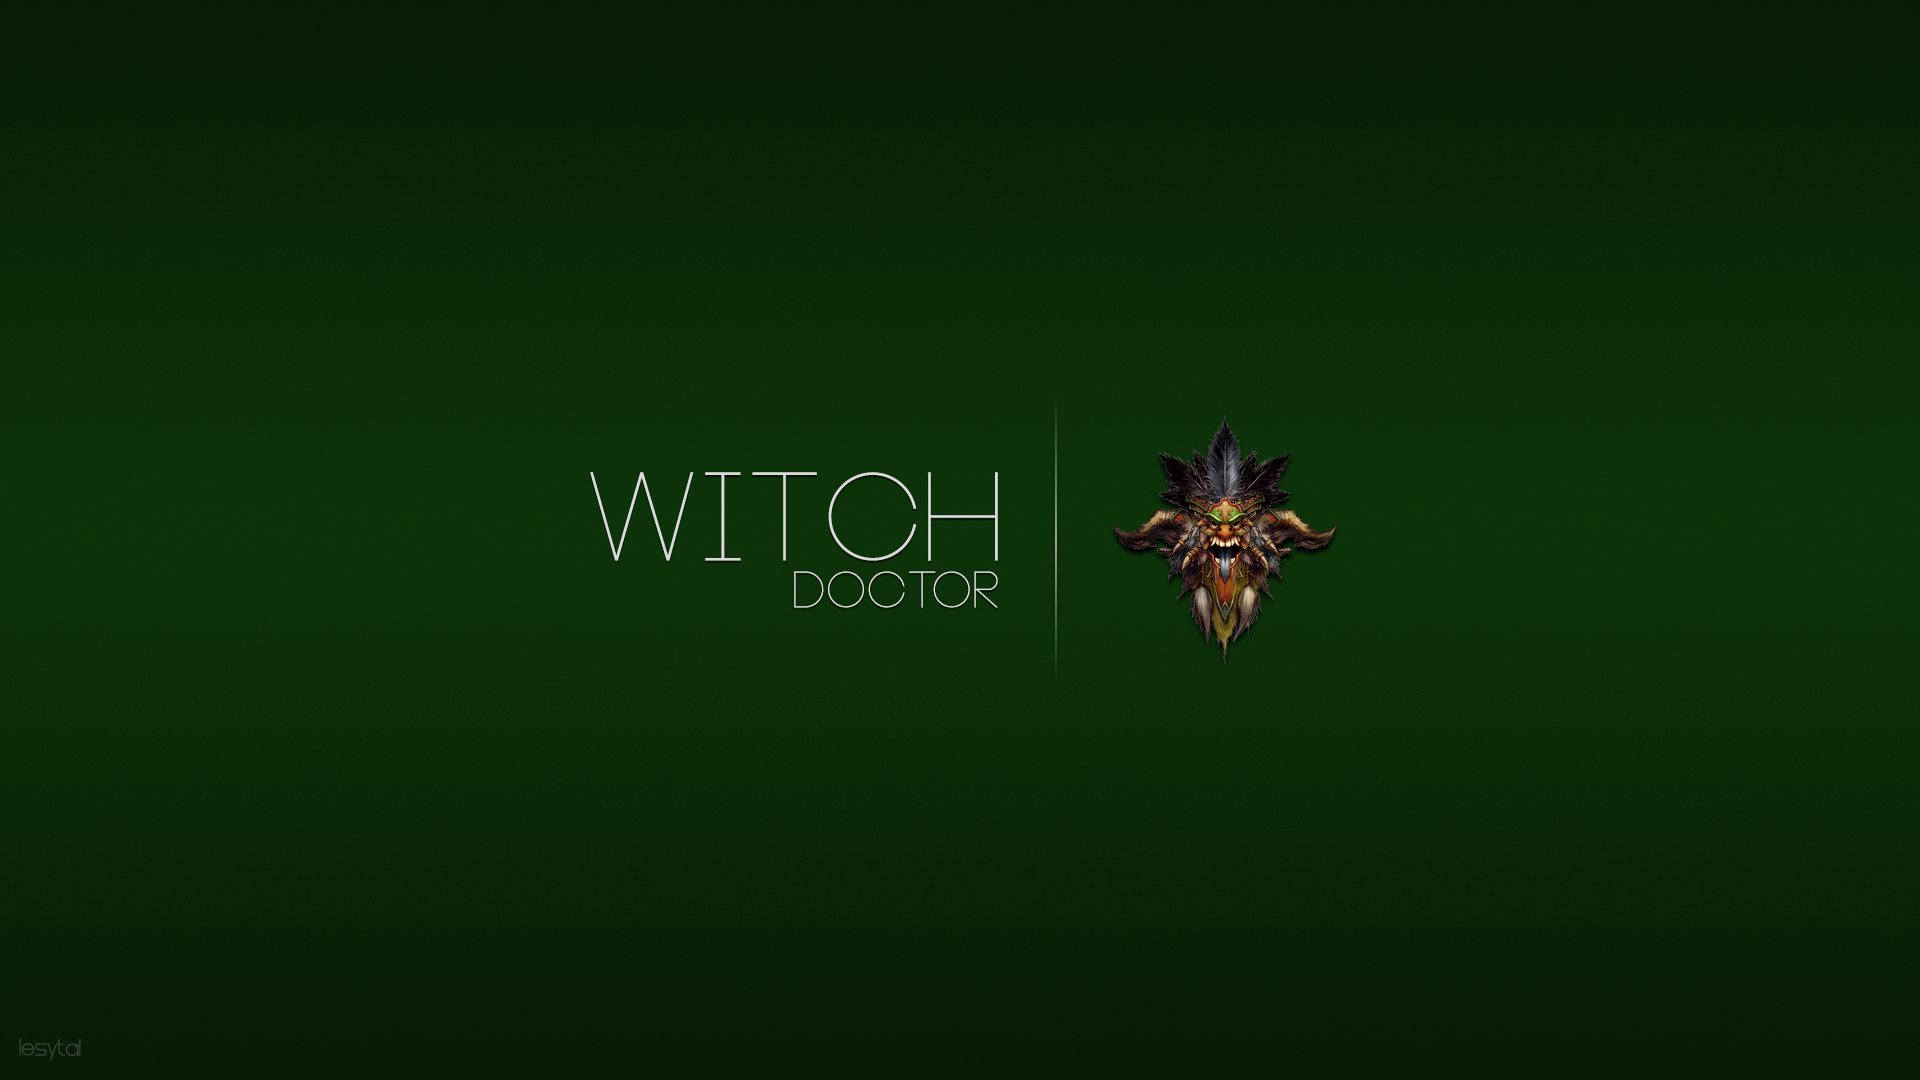 General 1920x1080 Diablo III classes video game characters crest witch doctor simple background green background video games PC gaming minimalism typography